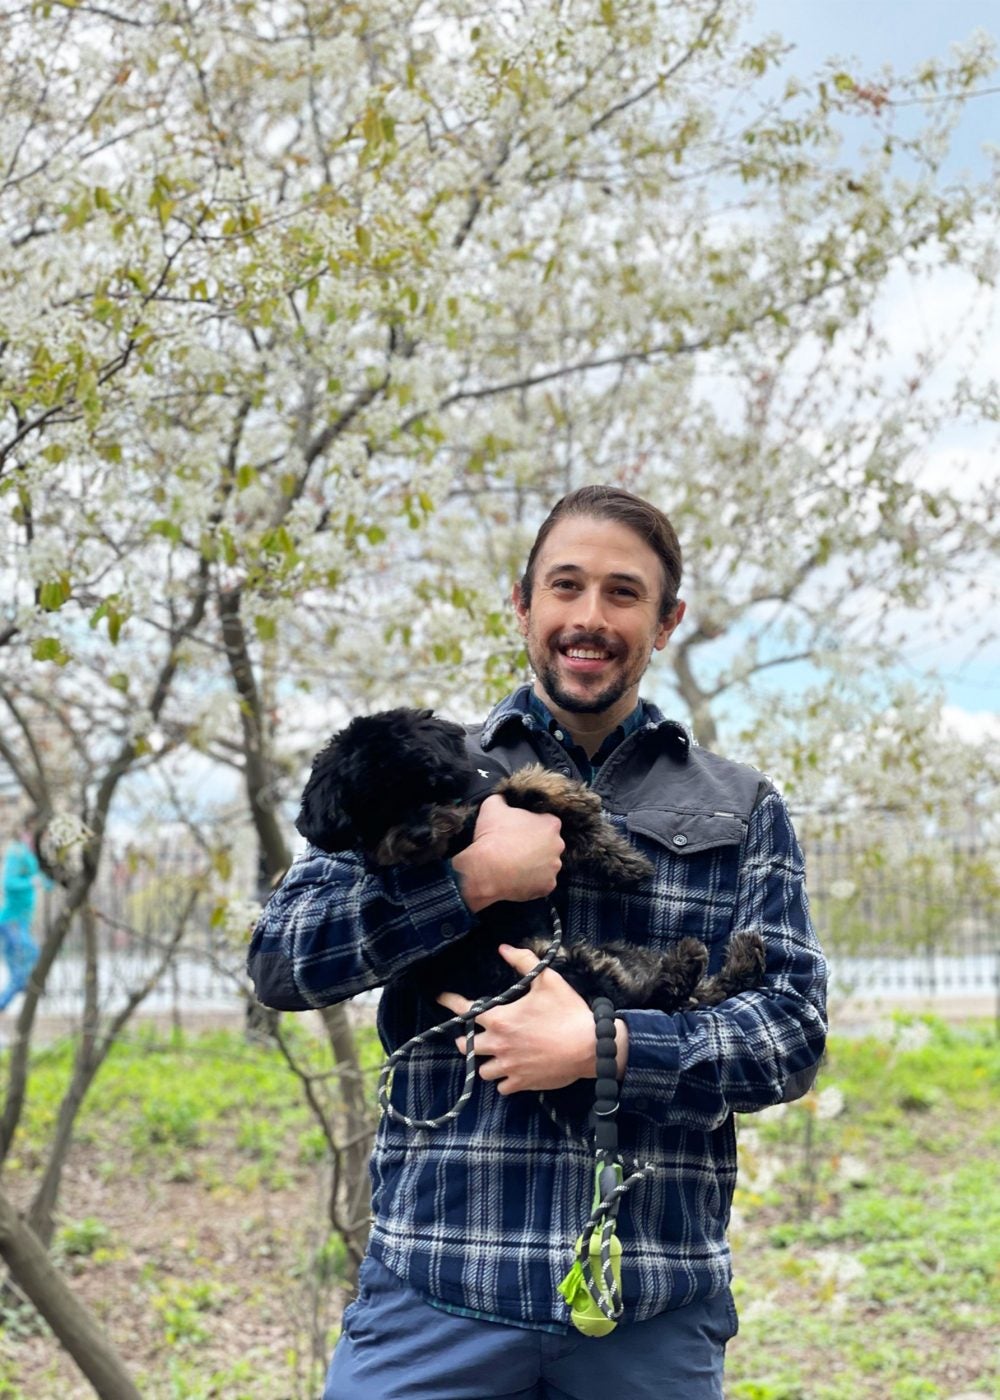 Nelson LaMarche, Ph.D. ’20, with his miniature poodle, Wyatt. When LaMarch arrived at Harvard Medical School his research focused on immunometabolism and obesity. 